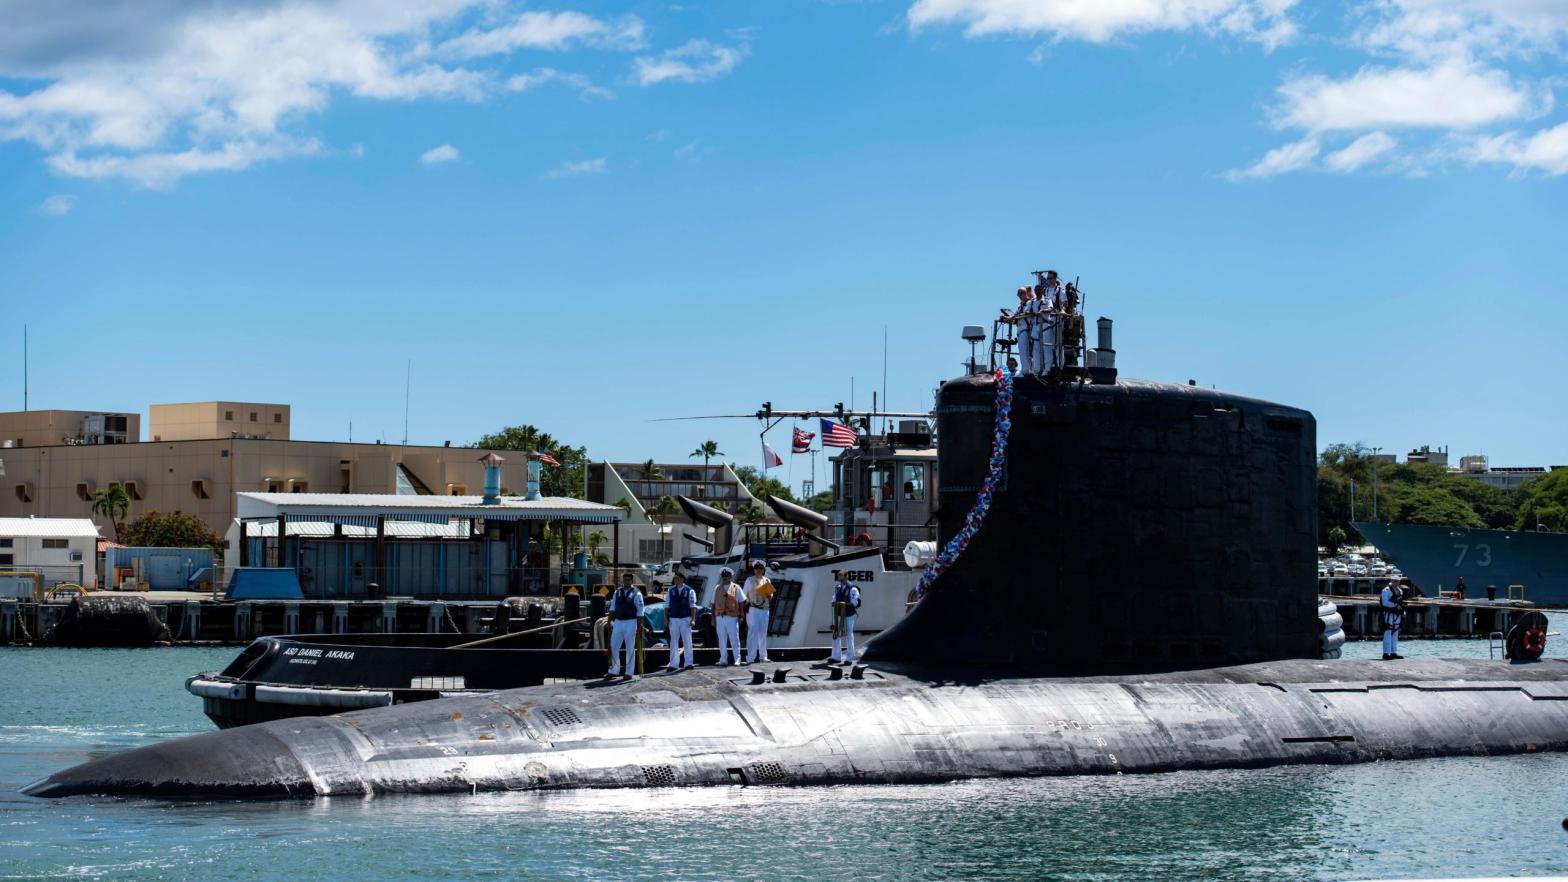 The Virginia-class nuclear submarine USS Illinois (SSN 786), seen here returning to Joint Base Pearl Harbour-Hickam in September 2021. (Photo: Mass Communication Specialist 1st Class Michael B. Zingaro / United States Navy, AP)